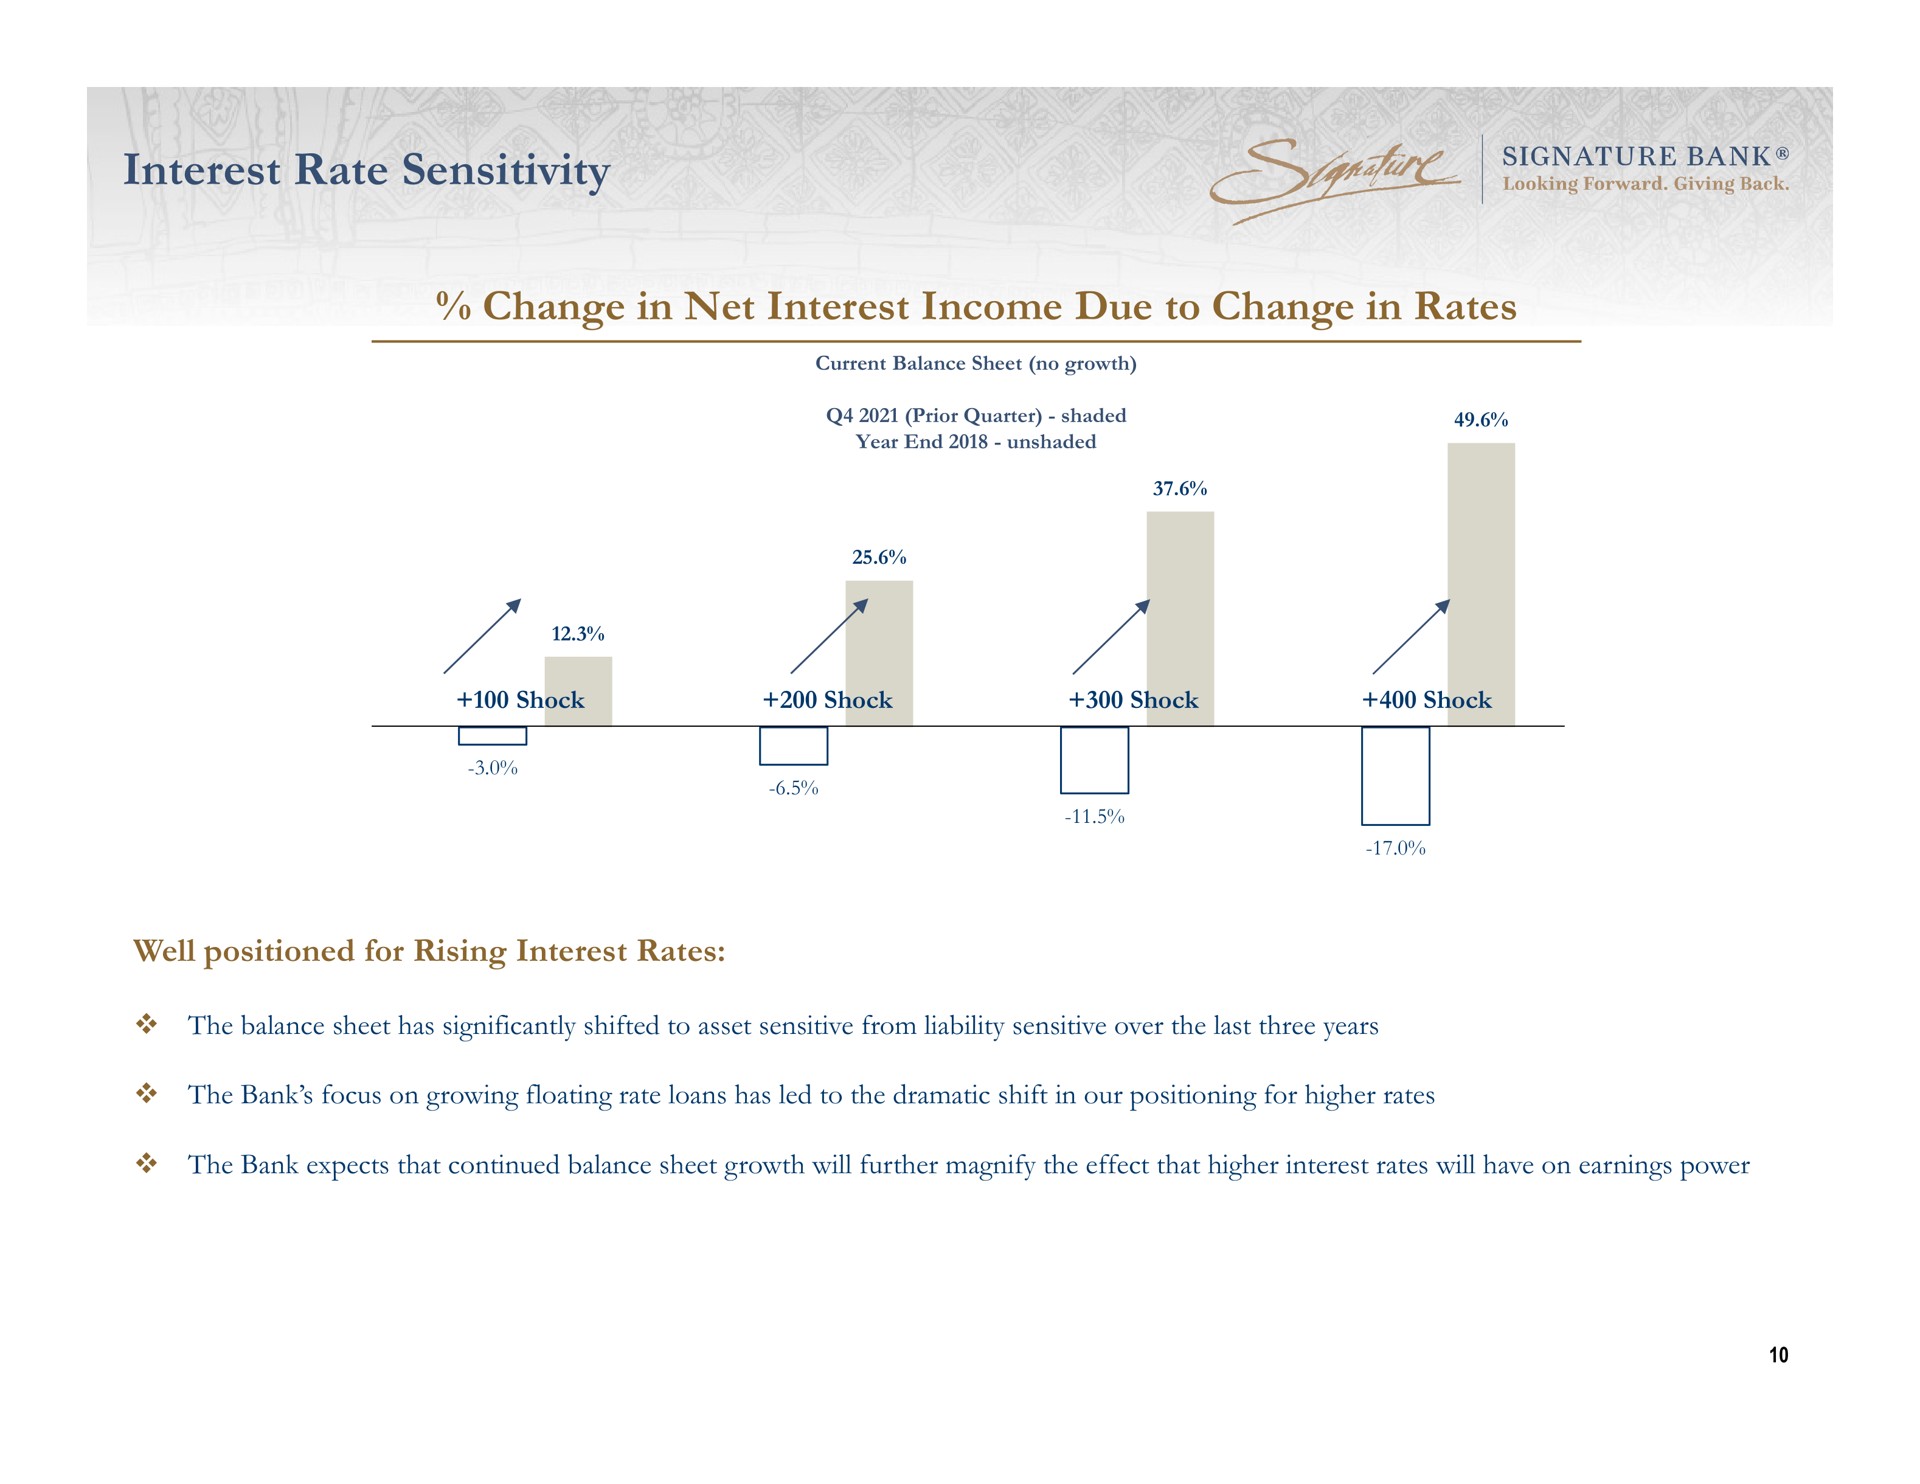 interest rate sensitivity change in net interest income due to change in rates | Signature Bank